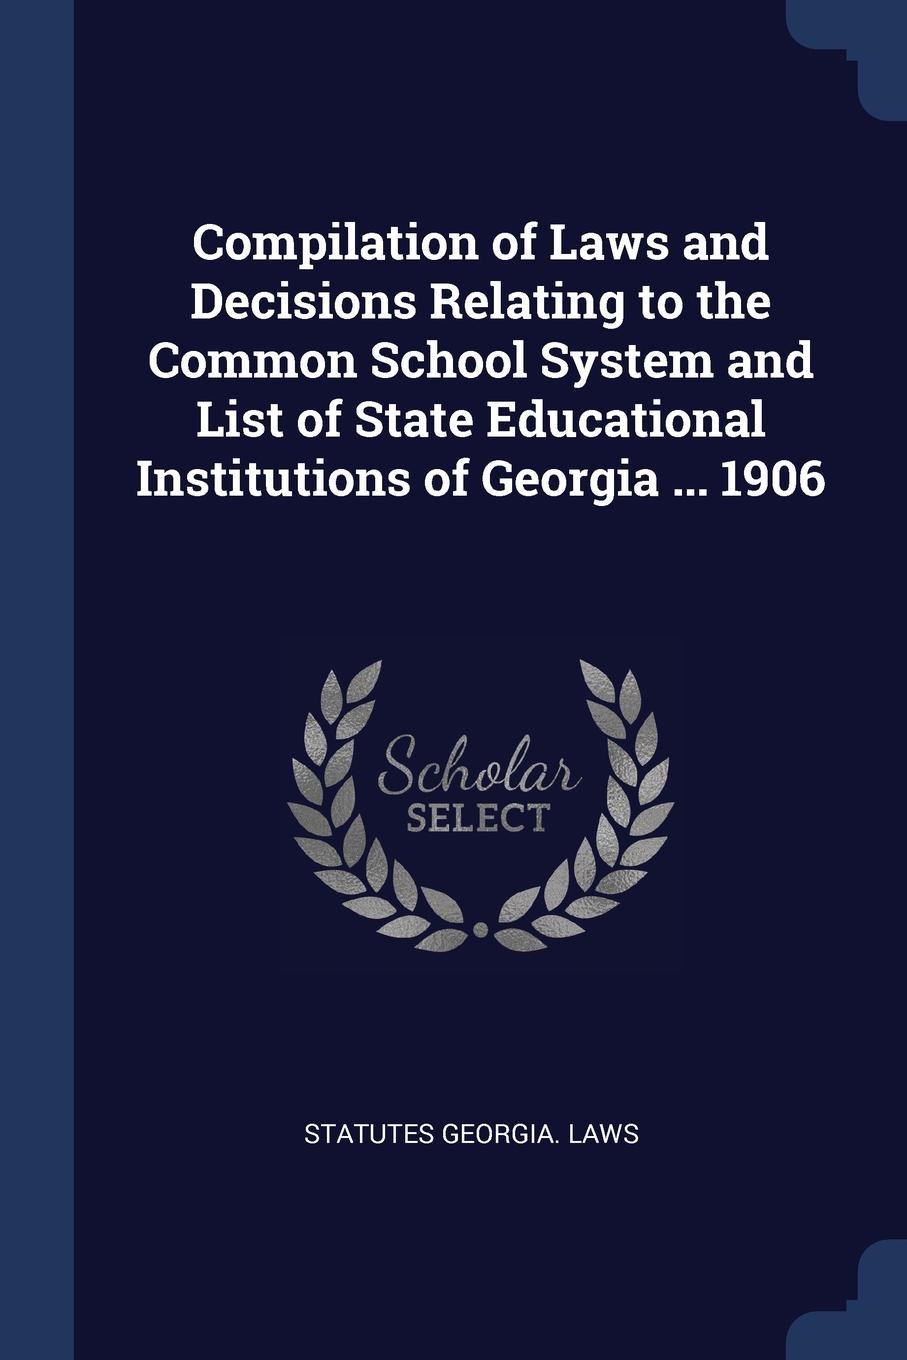 Compilation of Laws and Decisions Relating to the Common School System and List of State Educational Institutions of Georgia ... 1906